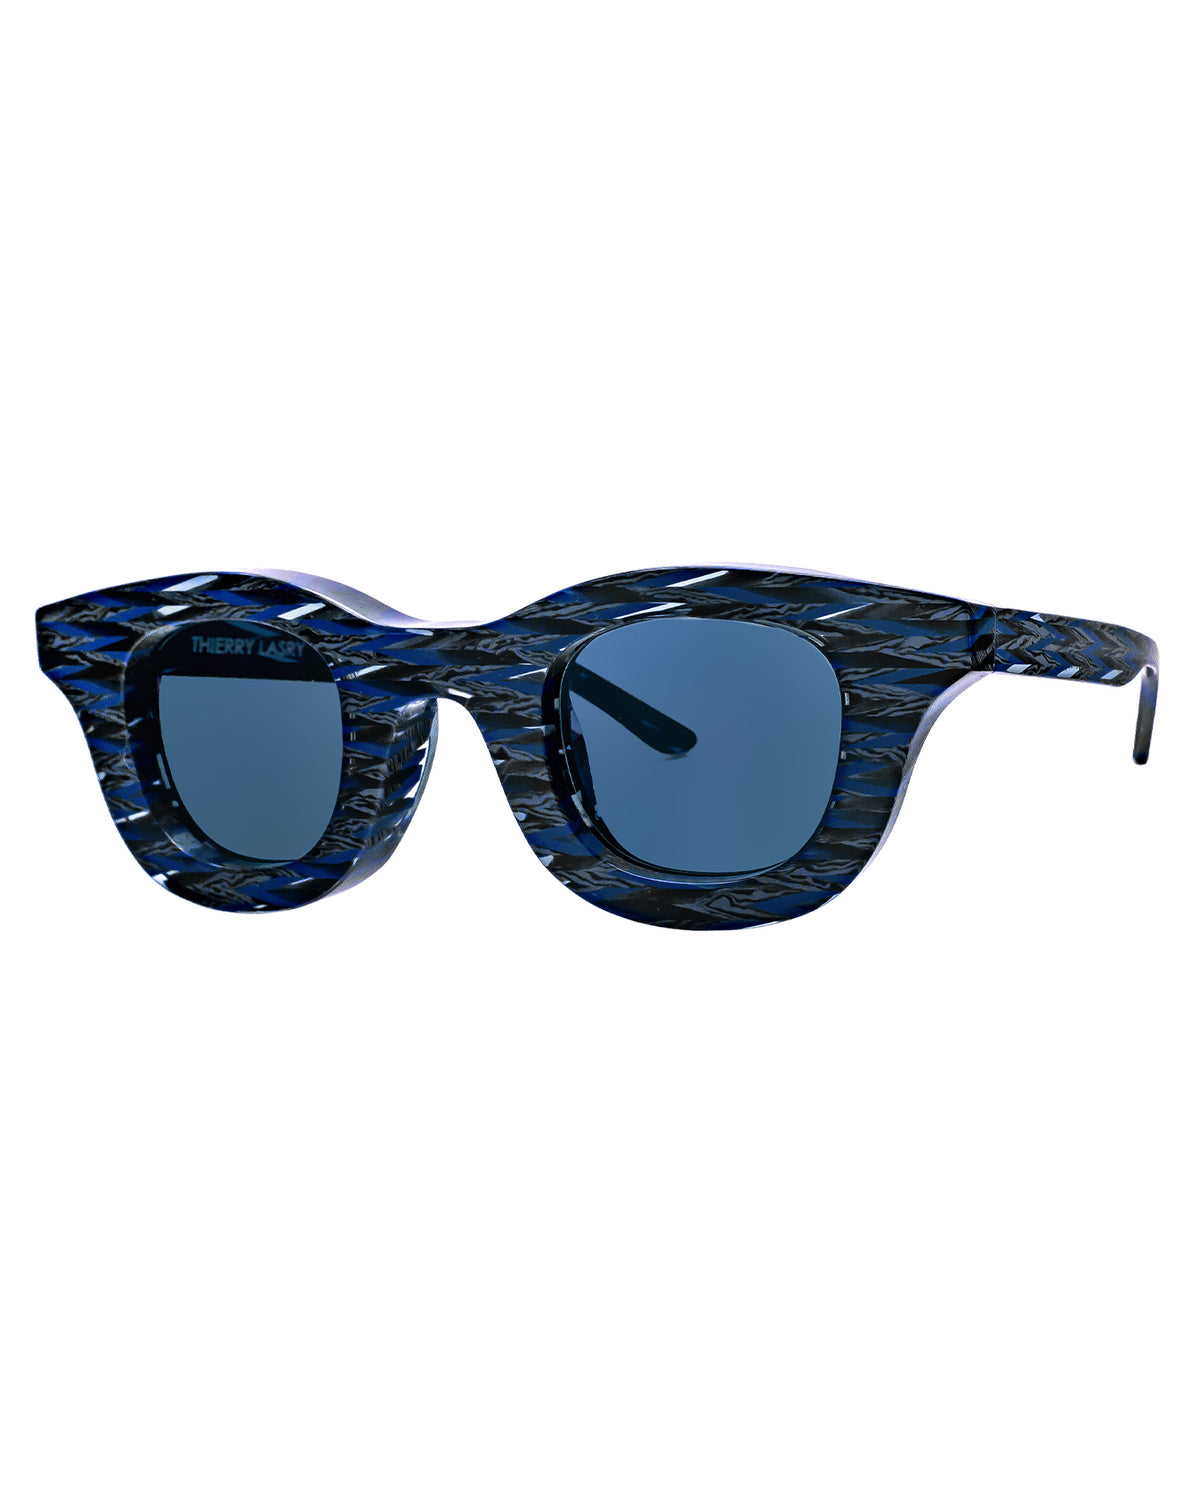 Hactivity - Blue Black Striped With Navy Lenses